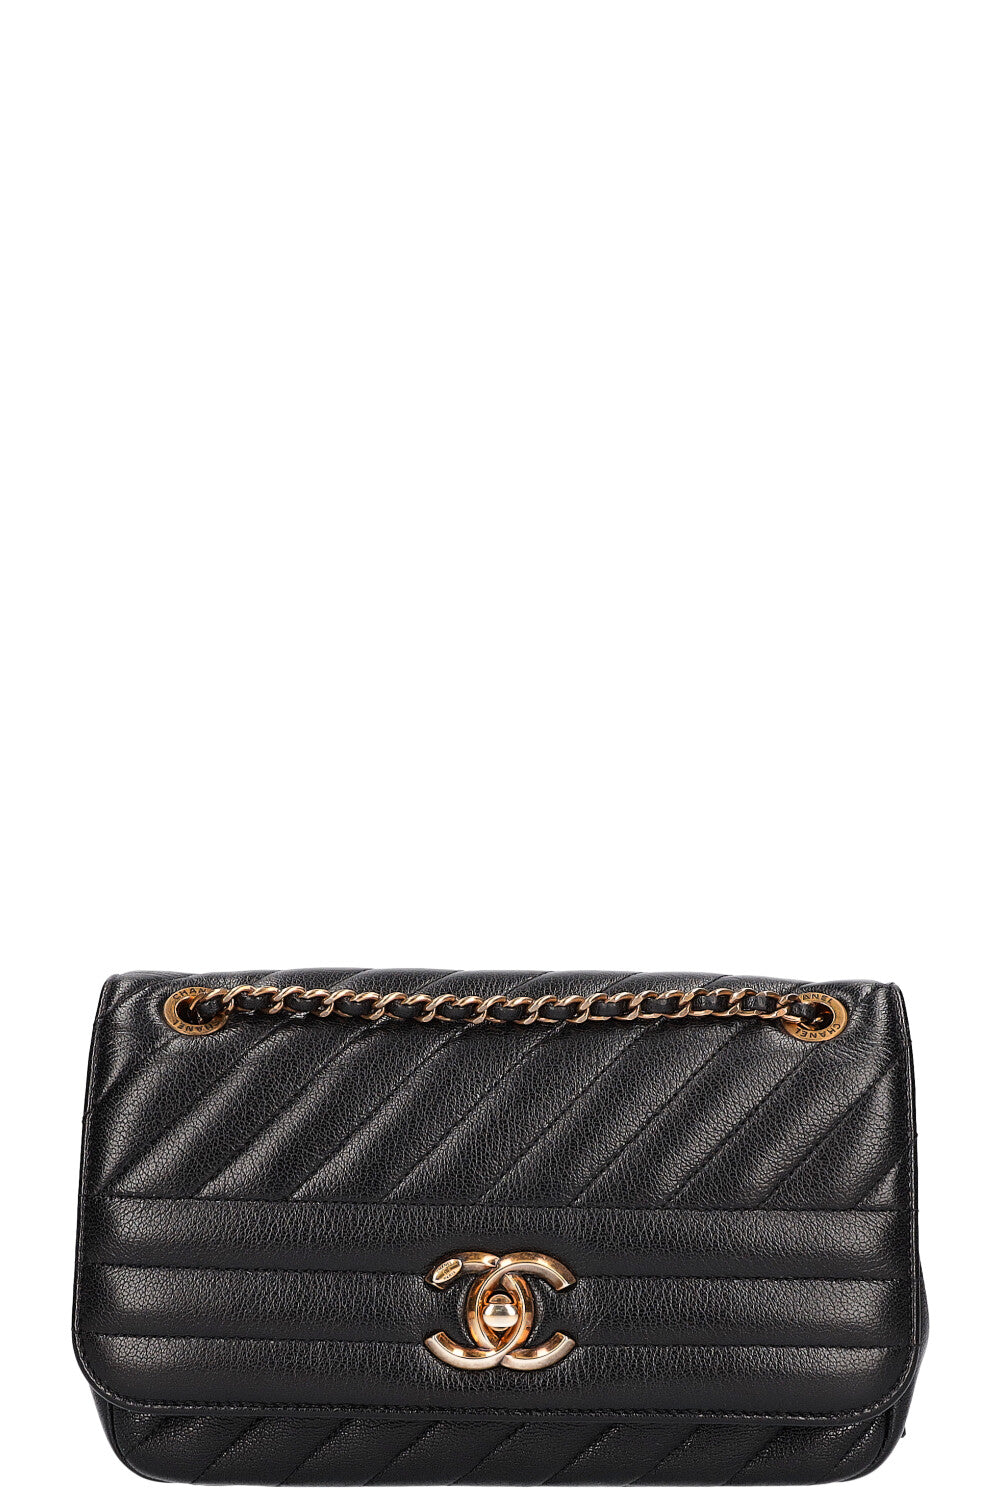 CHANEL Diagonal Quilted Single Flap Bag